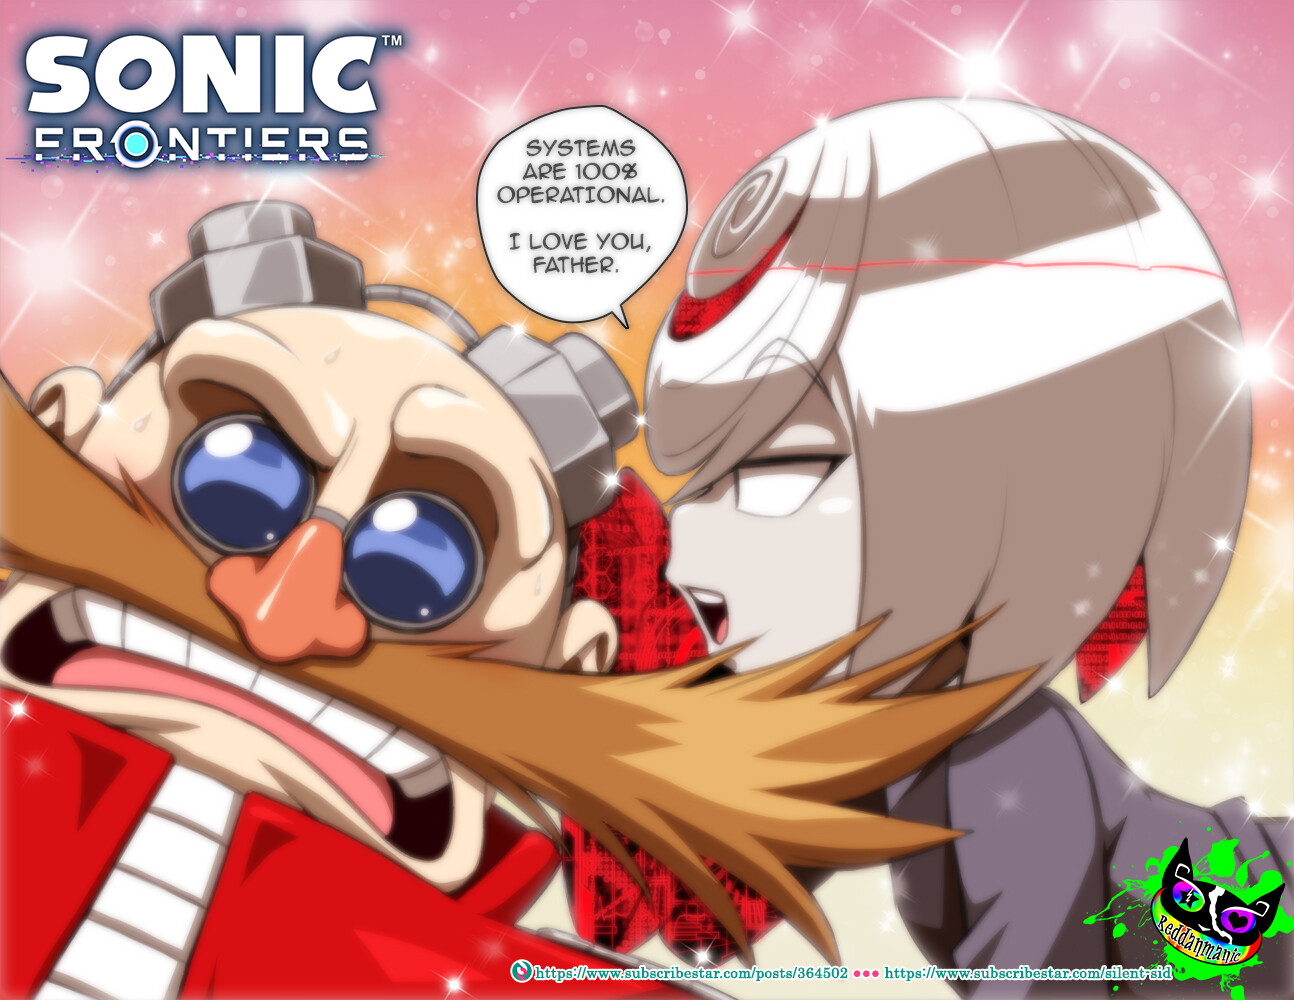 ArtStation - Sonic Frontiers - Sage and Eggman - Father Love